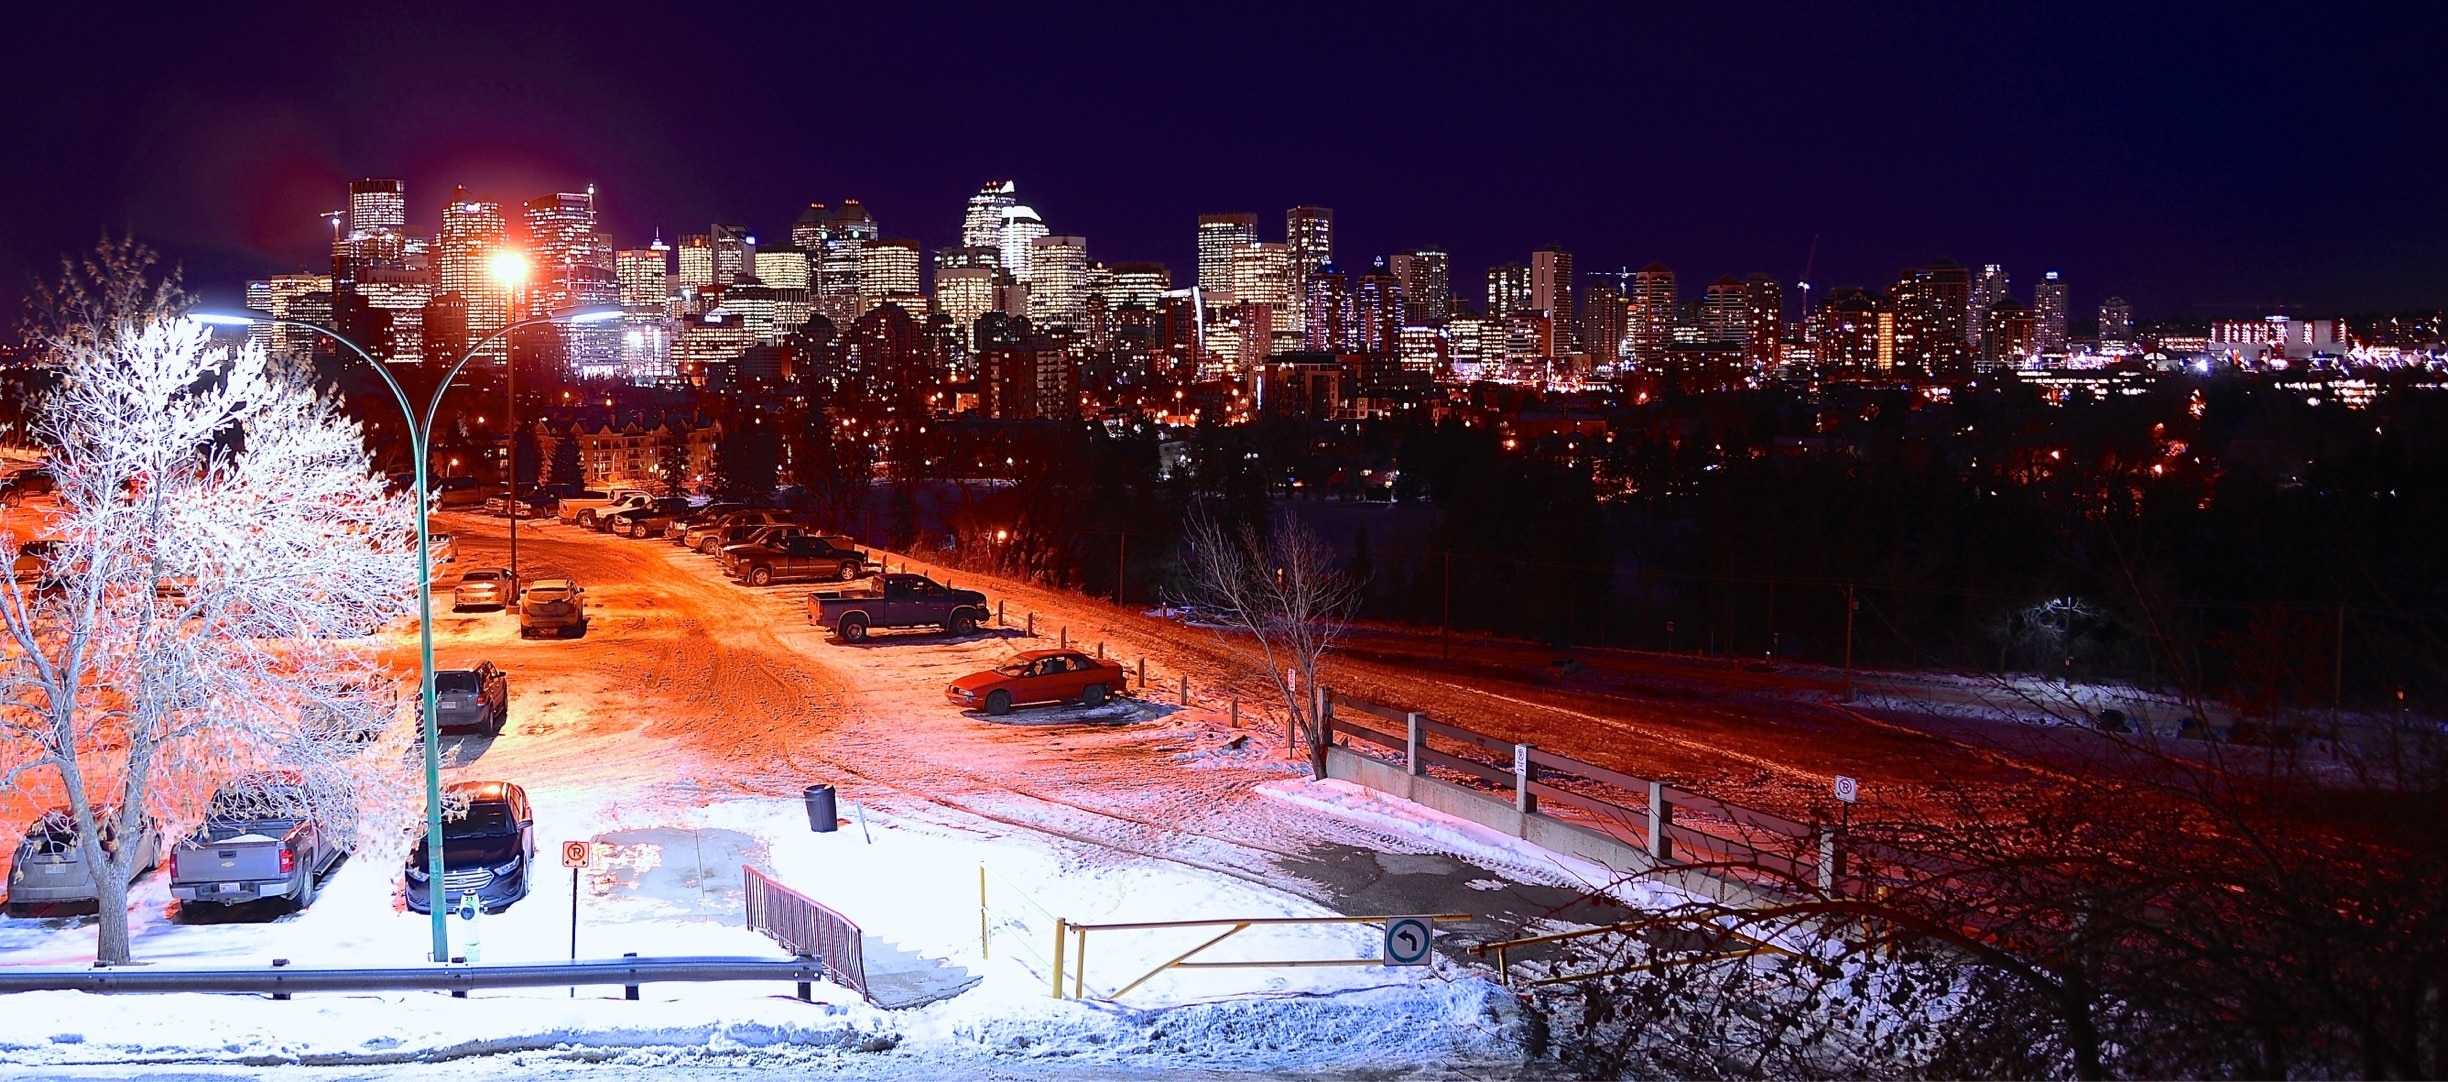 “Cowtown” The city of Calgary in the winter of the mystic #red colour.
#Canada #Alberta #Calgary #winter #snow #NorthAmerica #cityscape #nightscape #AboveItAll #OnTheRoad